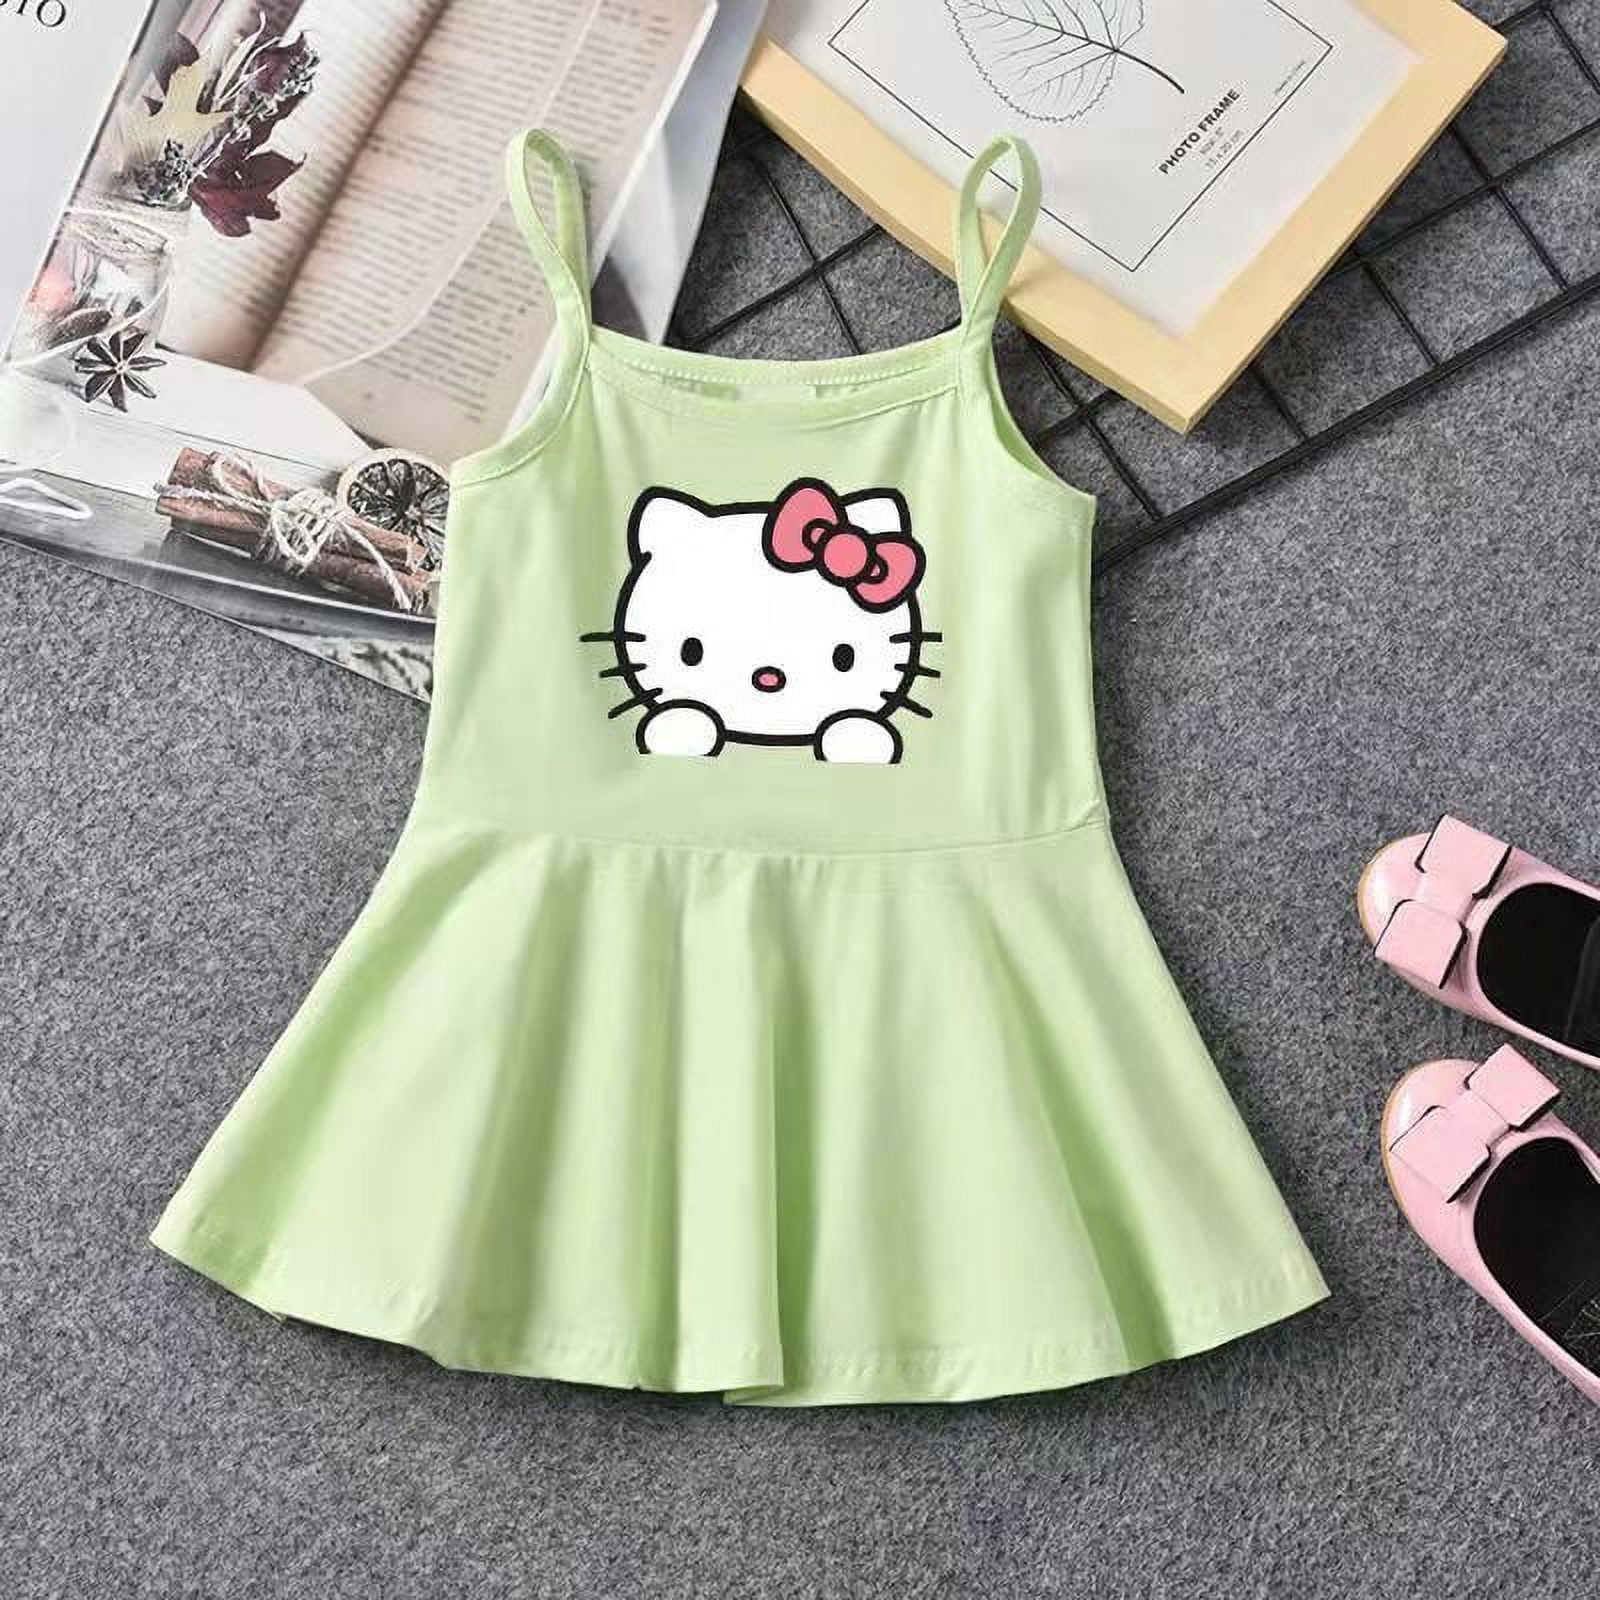 Summer Plaid Sling Dungaree Dress For Small Girls Sleeveless From Arraywu,  $13.24 | DHgate.Com